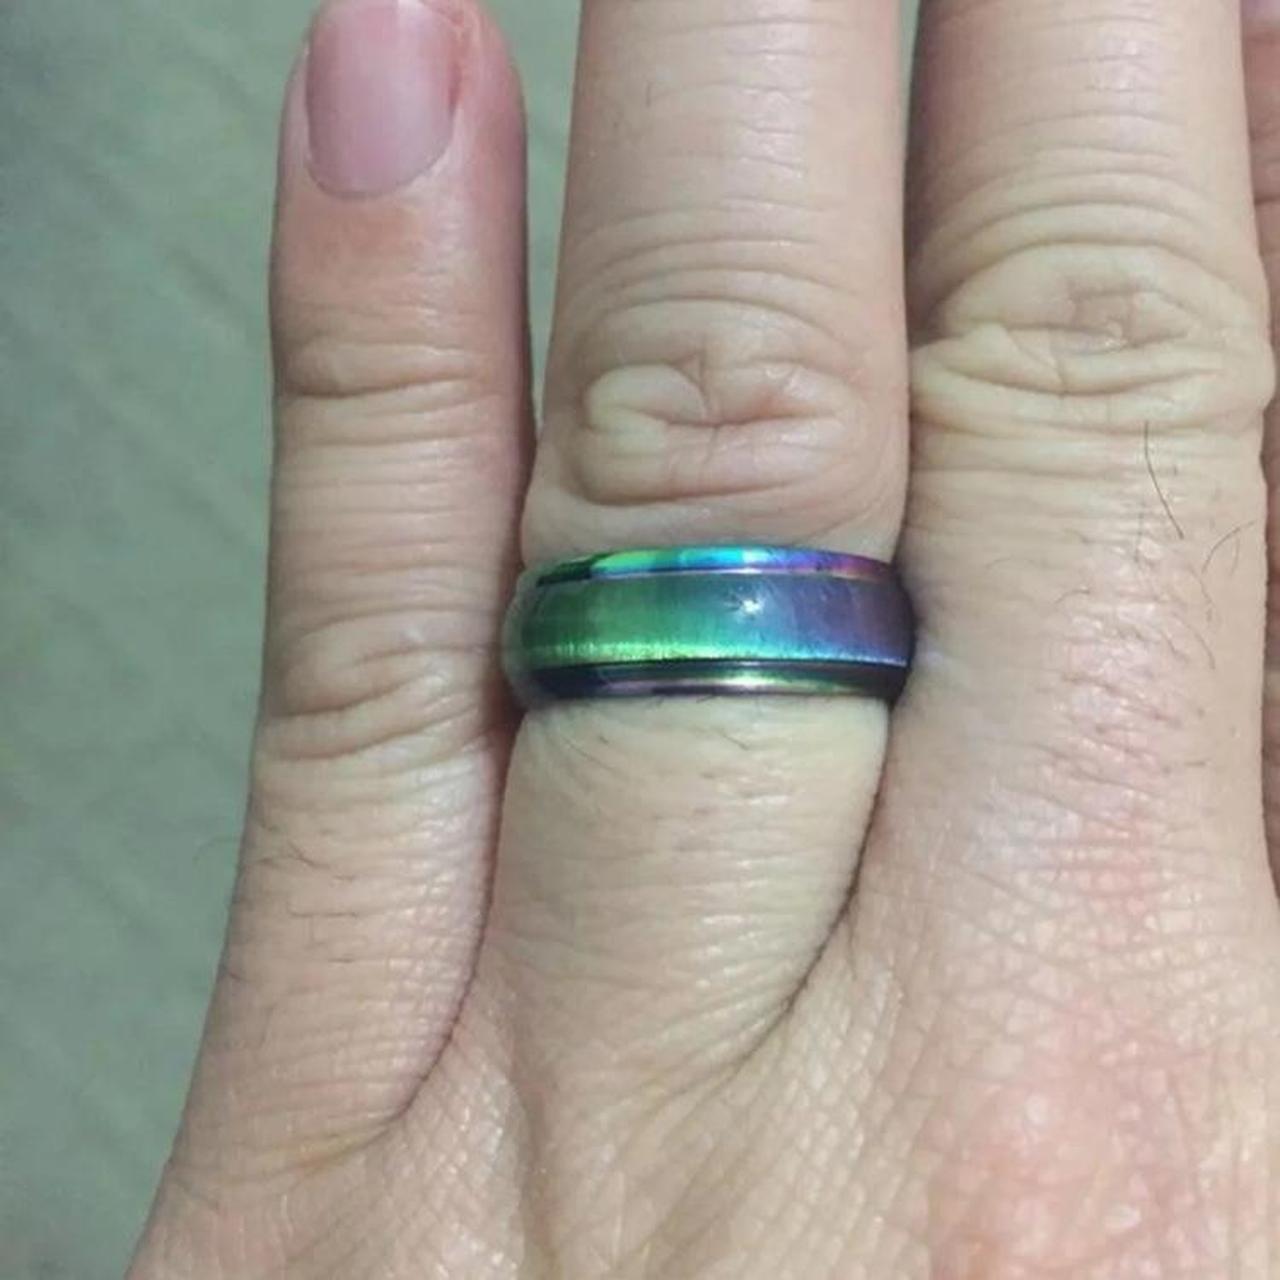 Product Image 4 - 6mm rainbow ring
Condition: 100% brand